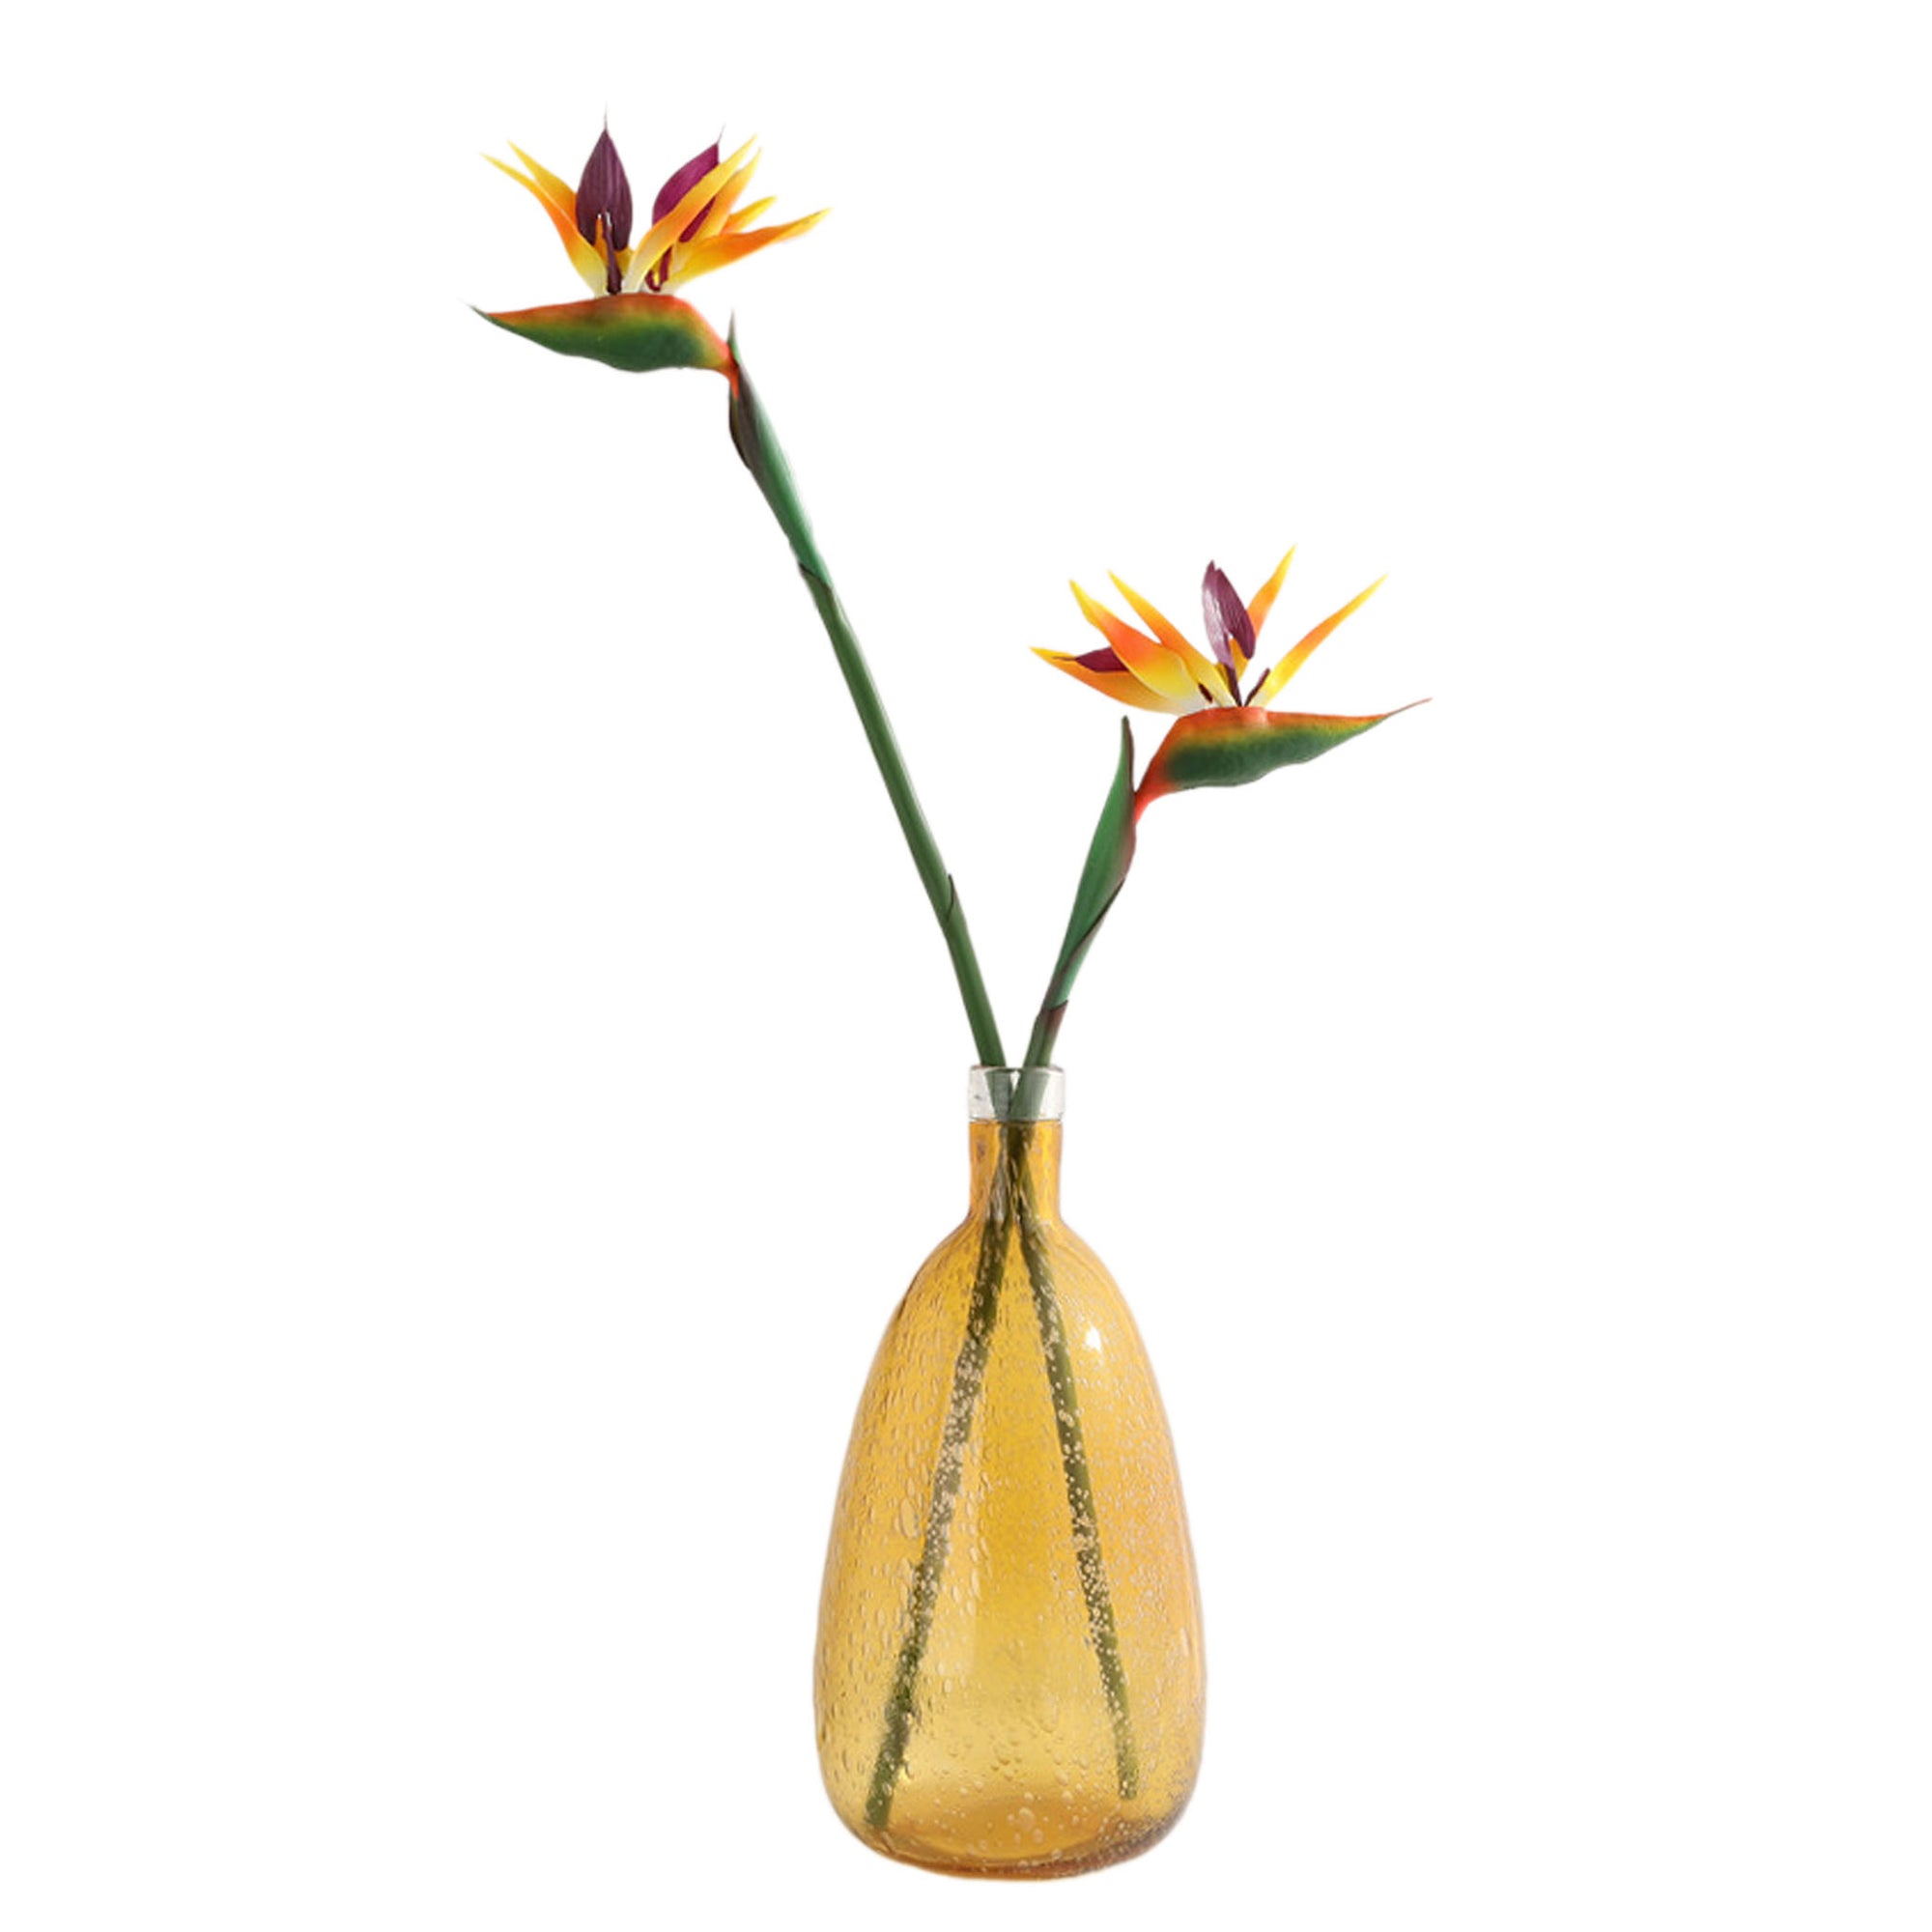 Real Touch Flowers Fake Bird Of Paradise 10 Stems